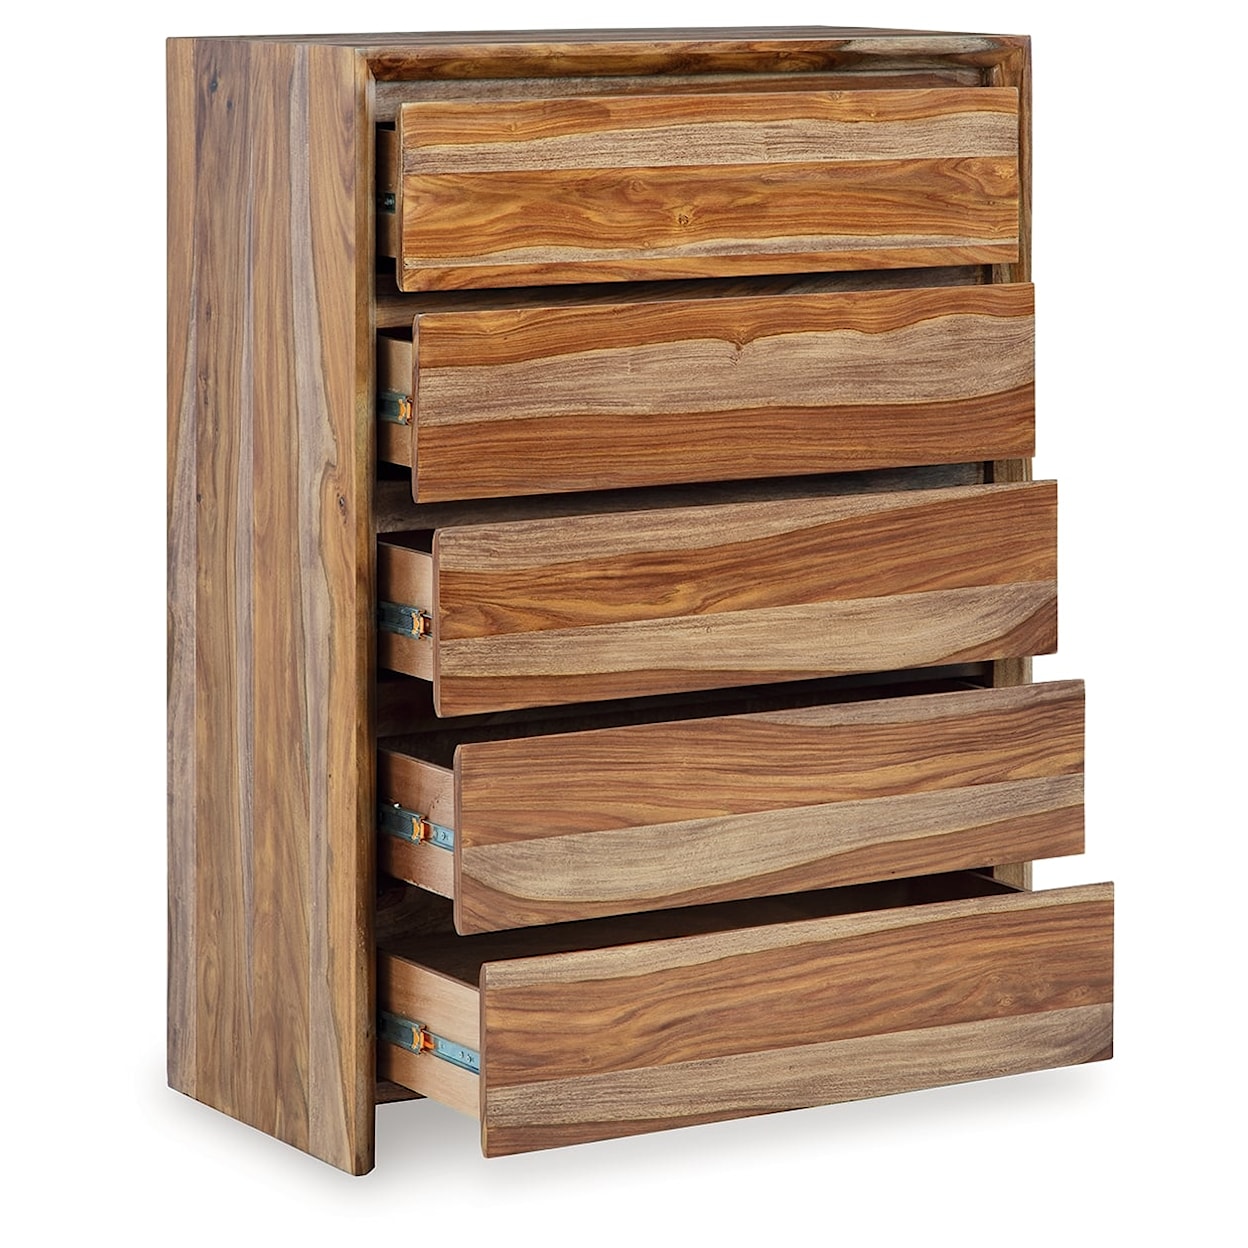 Signature Design by Ashley Dressonni 5-Drawer Chest